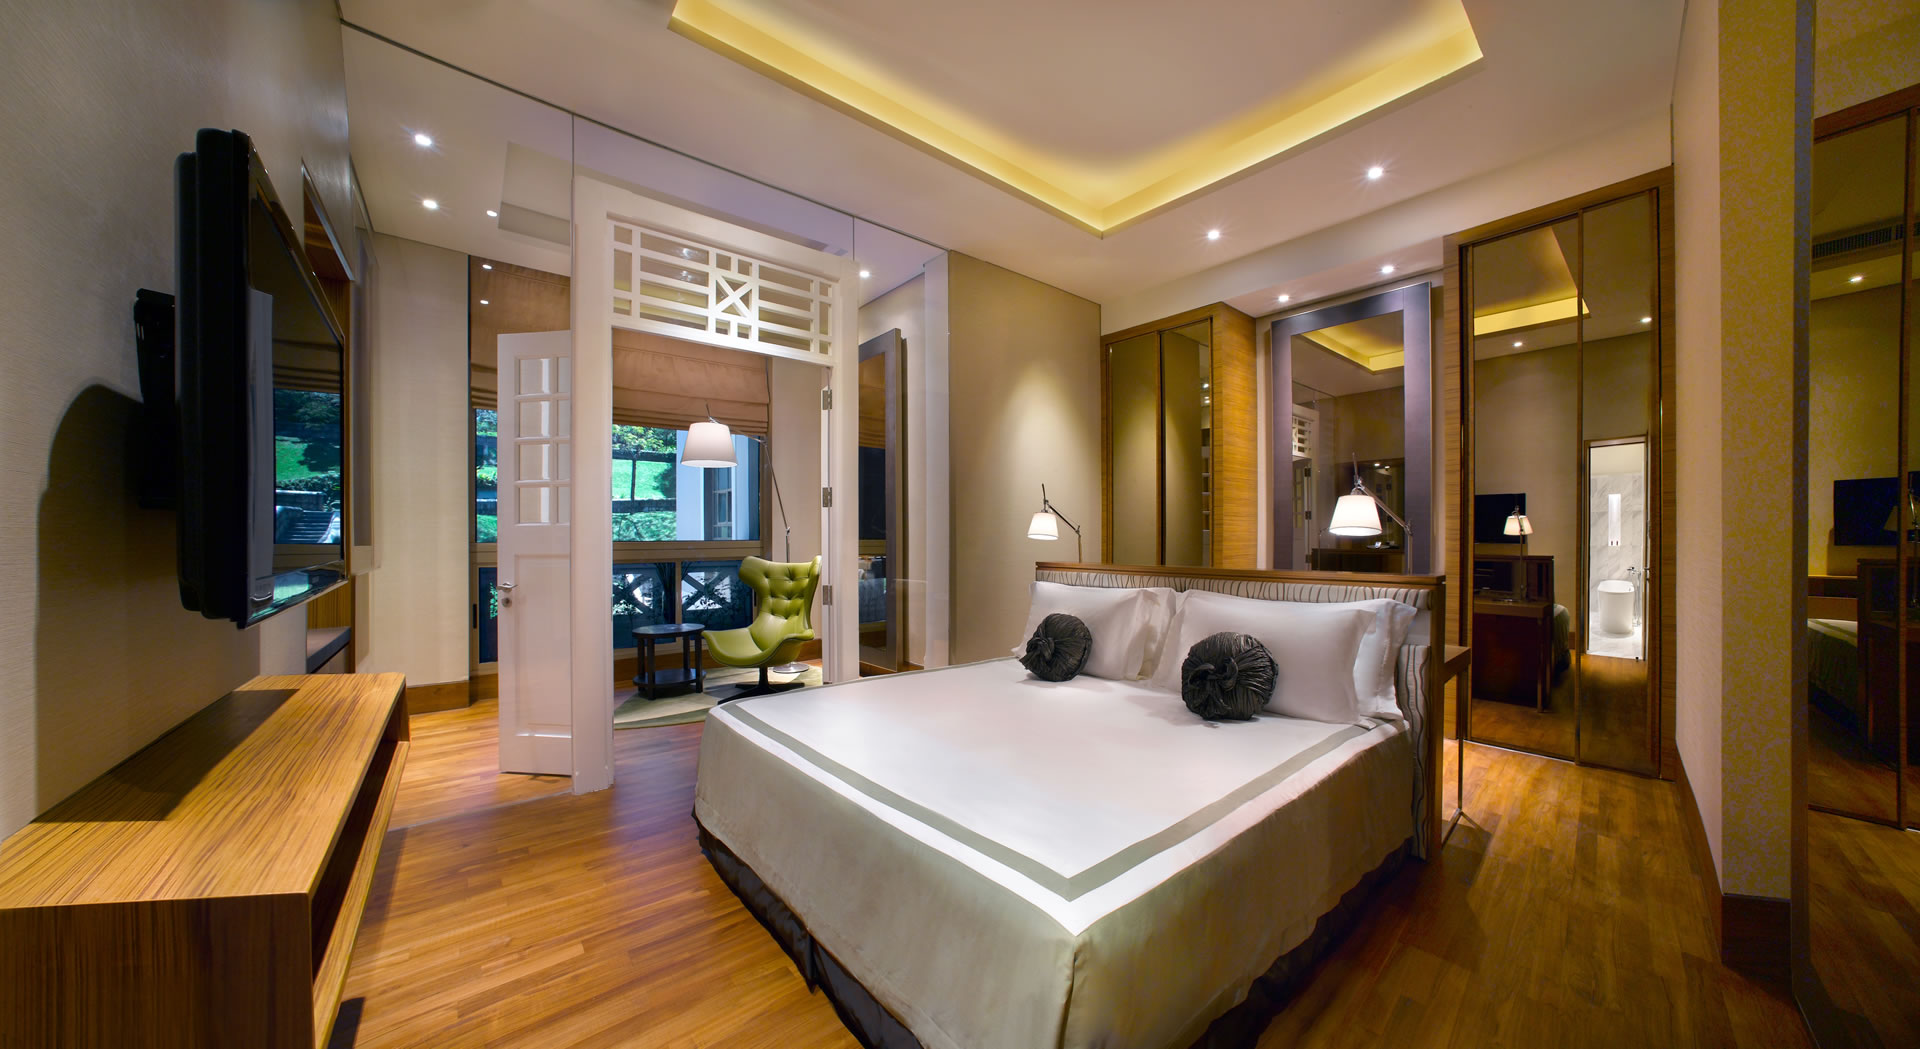 Best Boutique Hotels - Hotel Fort Canning interior